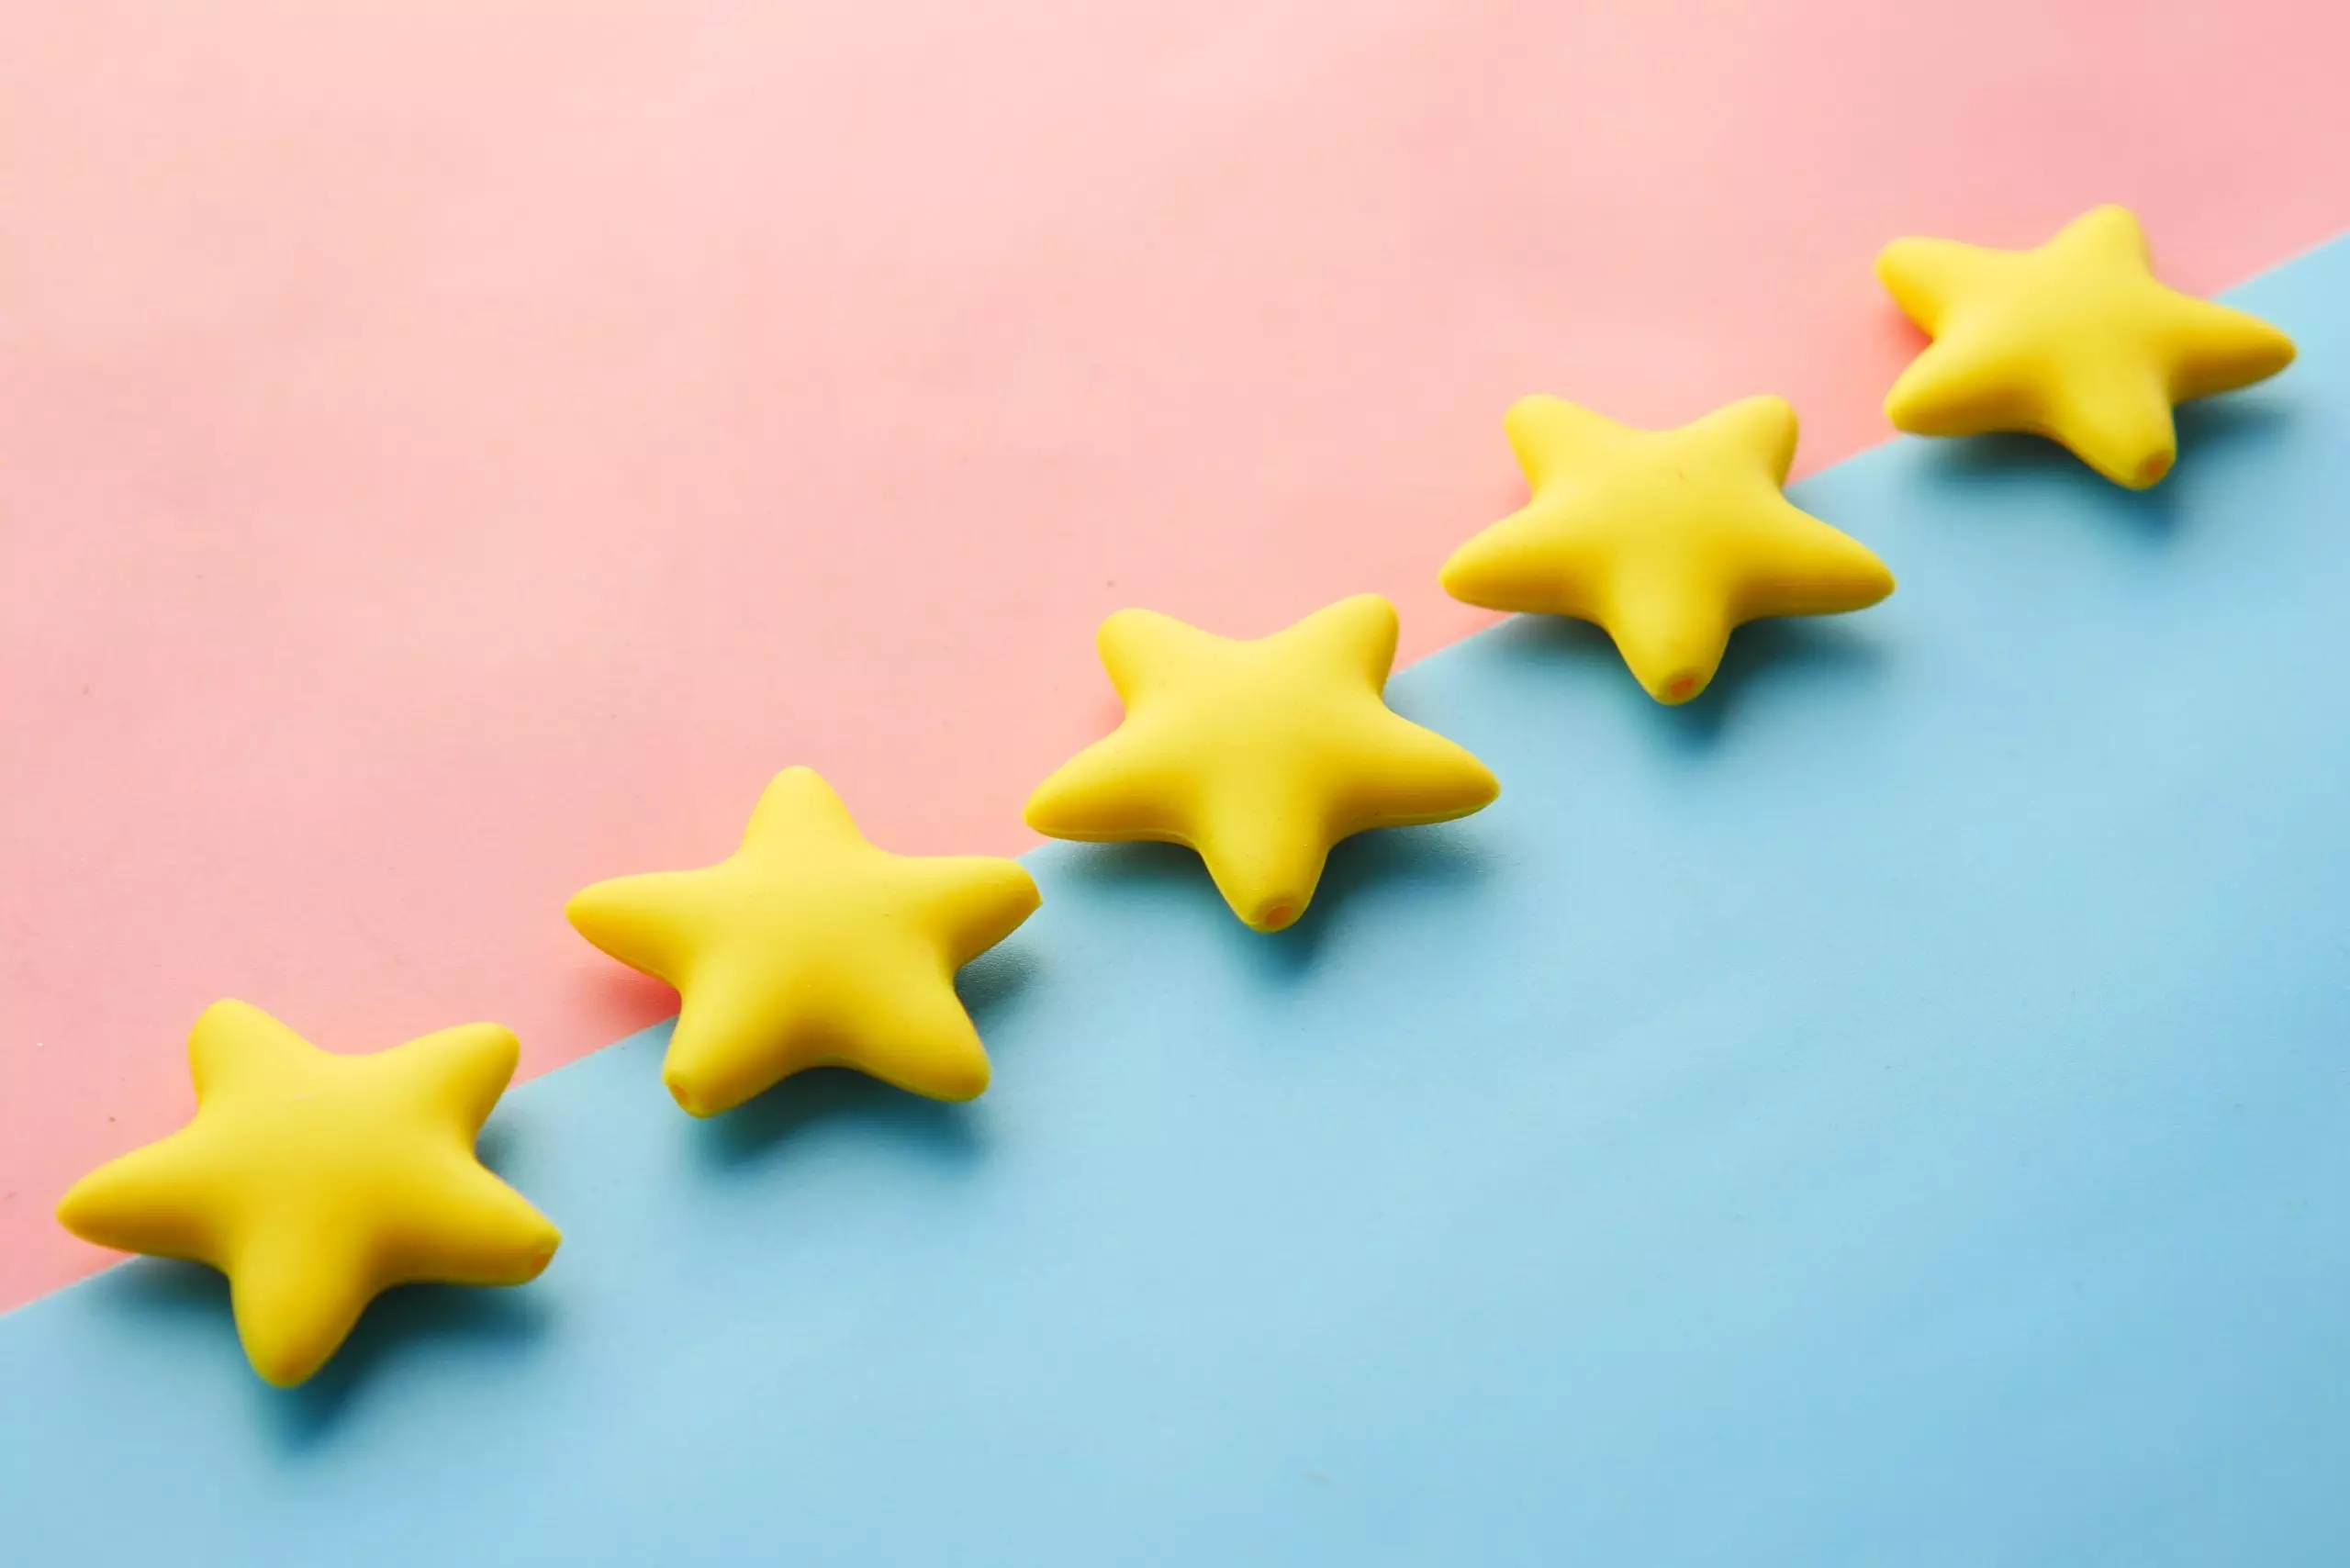 five-yellow-stars-on-a-diagonal-pink-and-blue-background